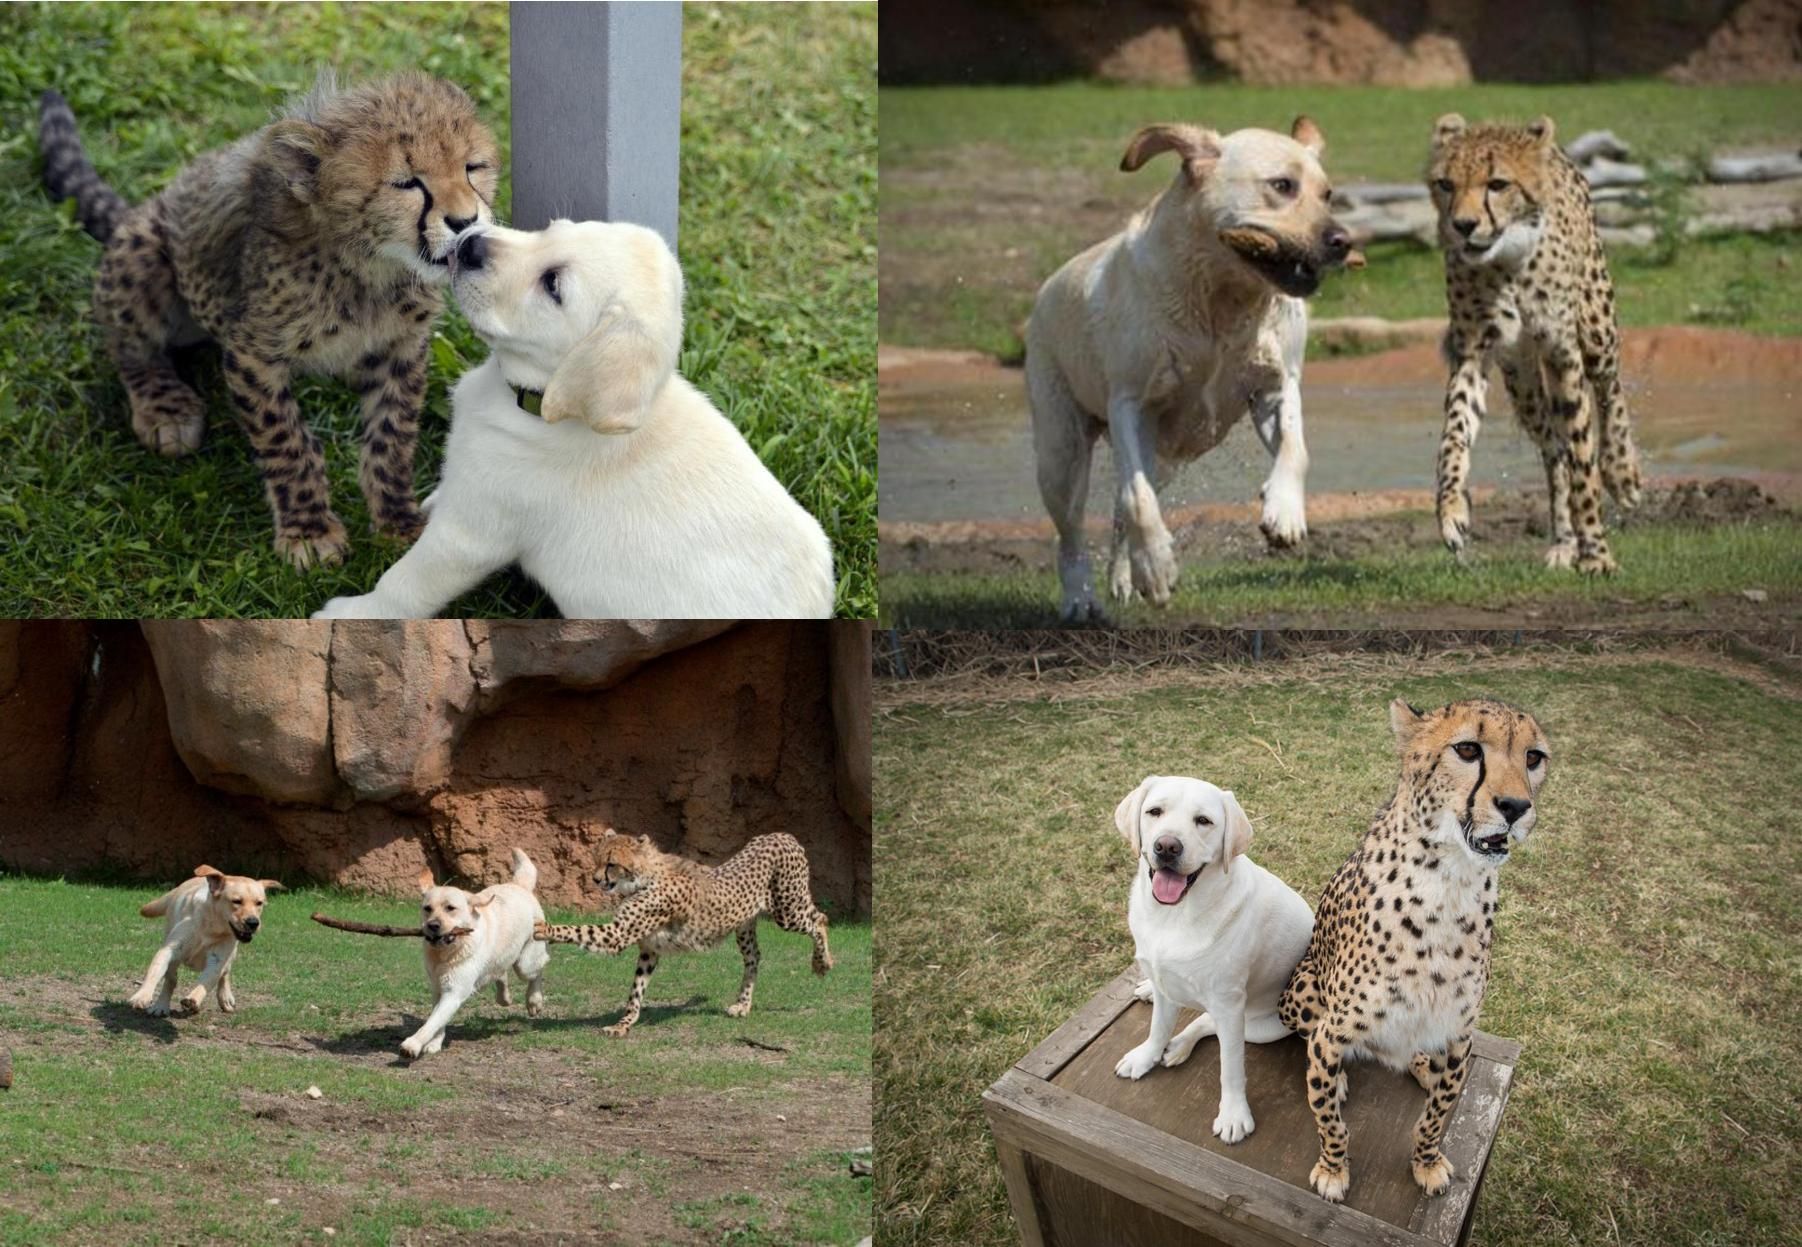 Cheetahs are really nervous animals, and some zoos give them "support dogs" to relax